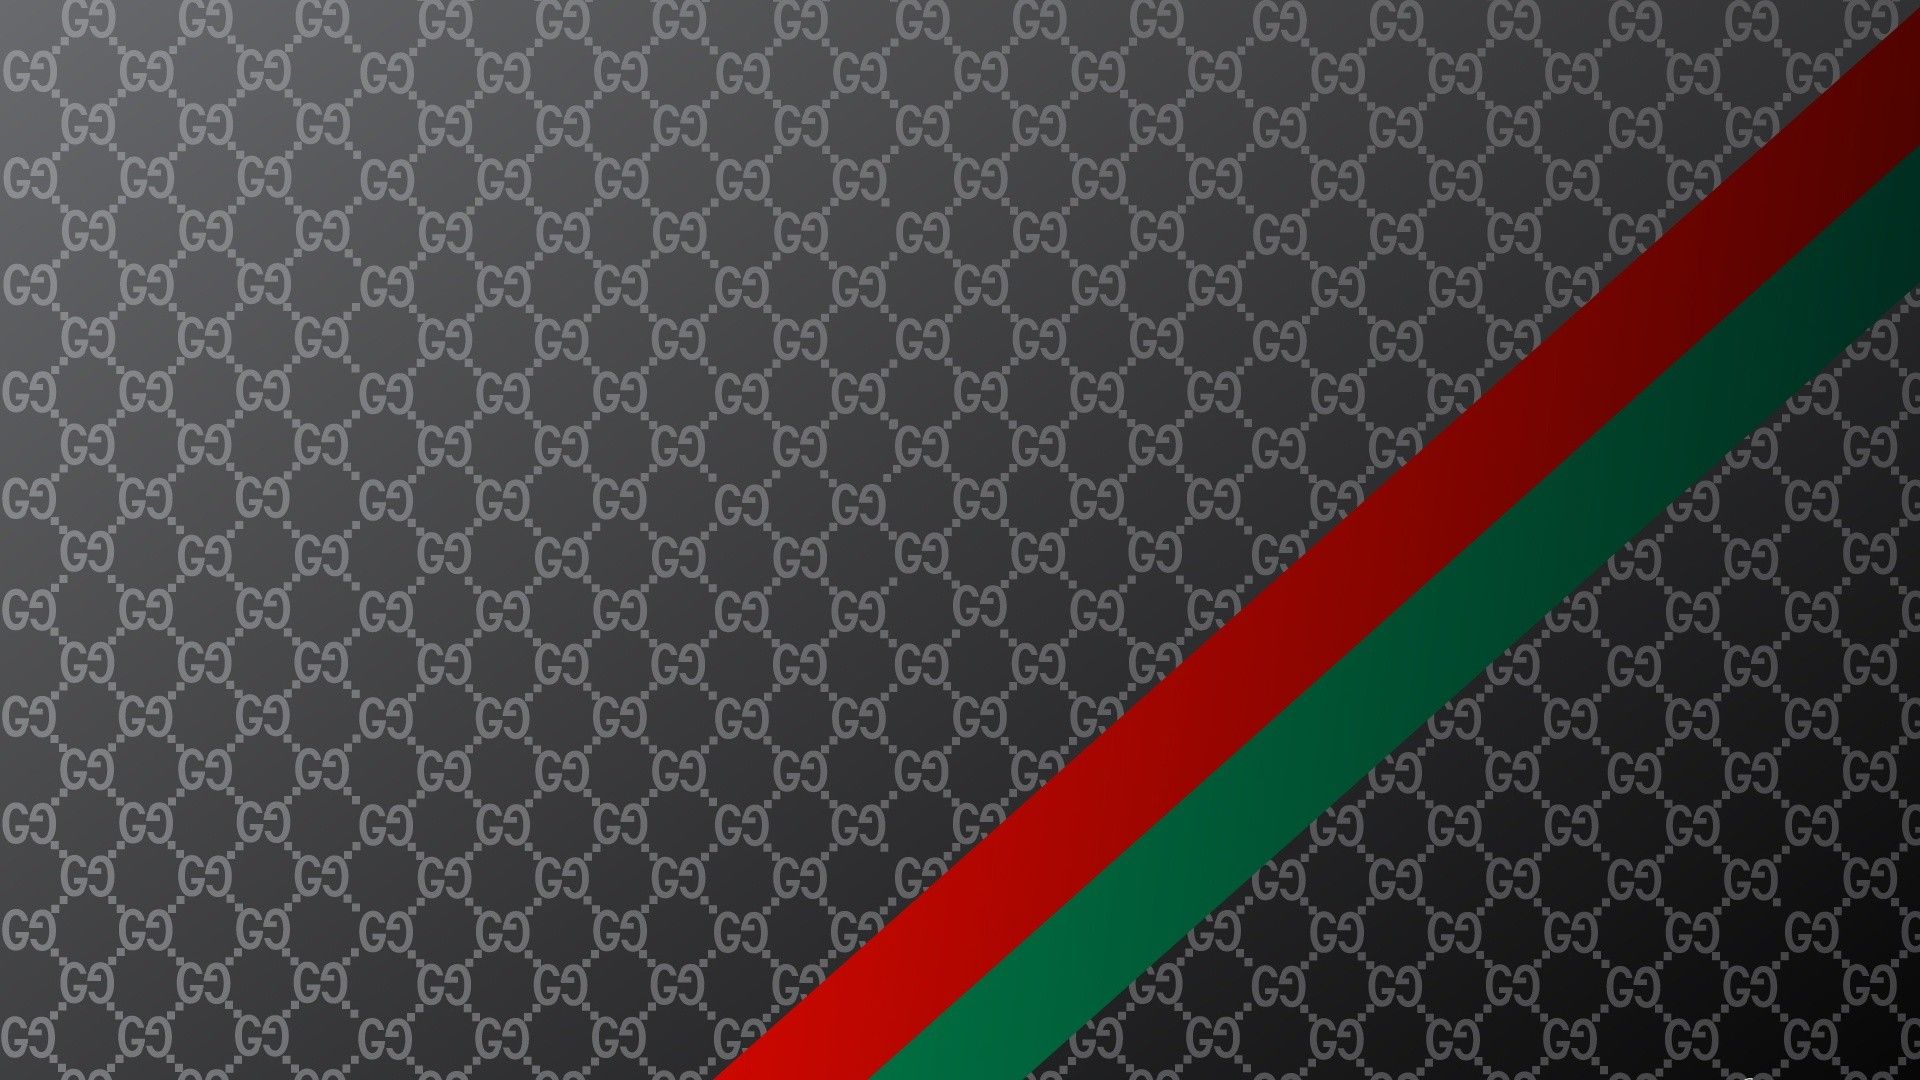 Gucci Desktop Wallpaper.GiftWatches.CO